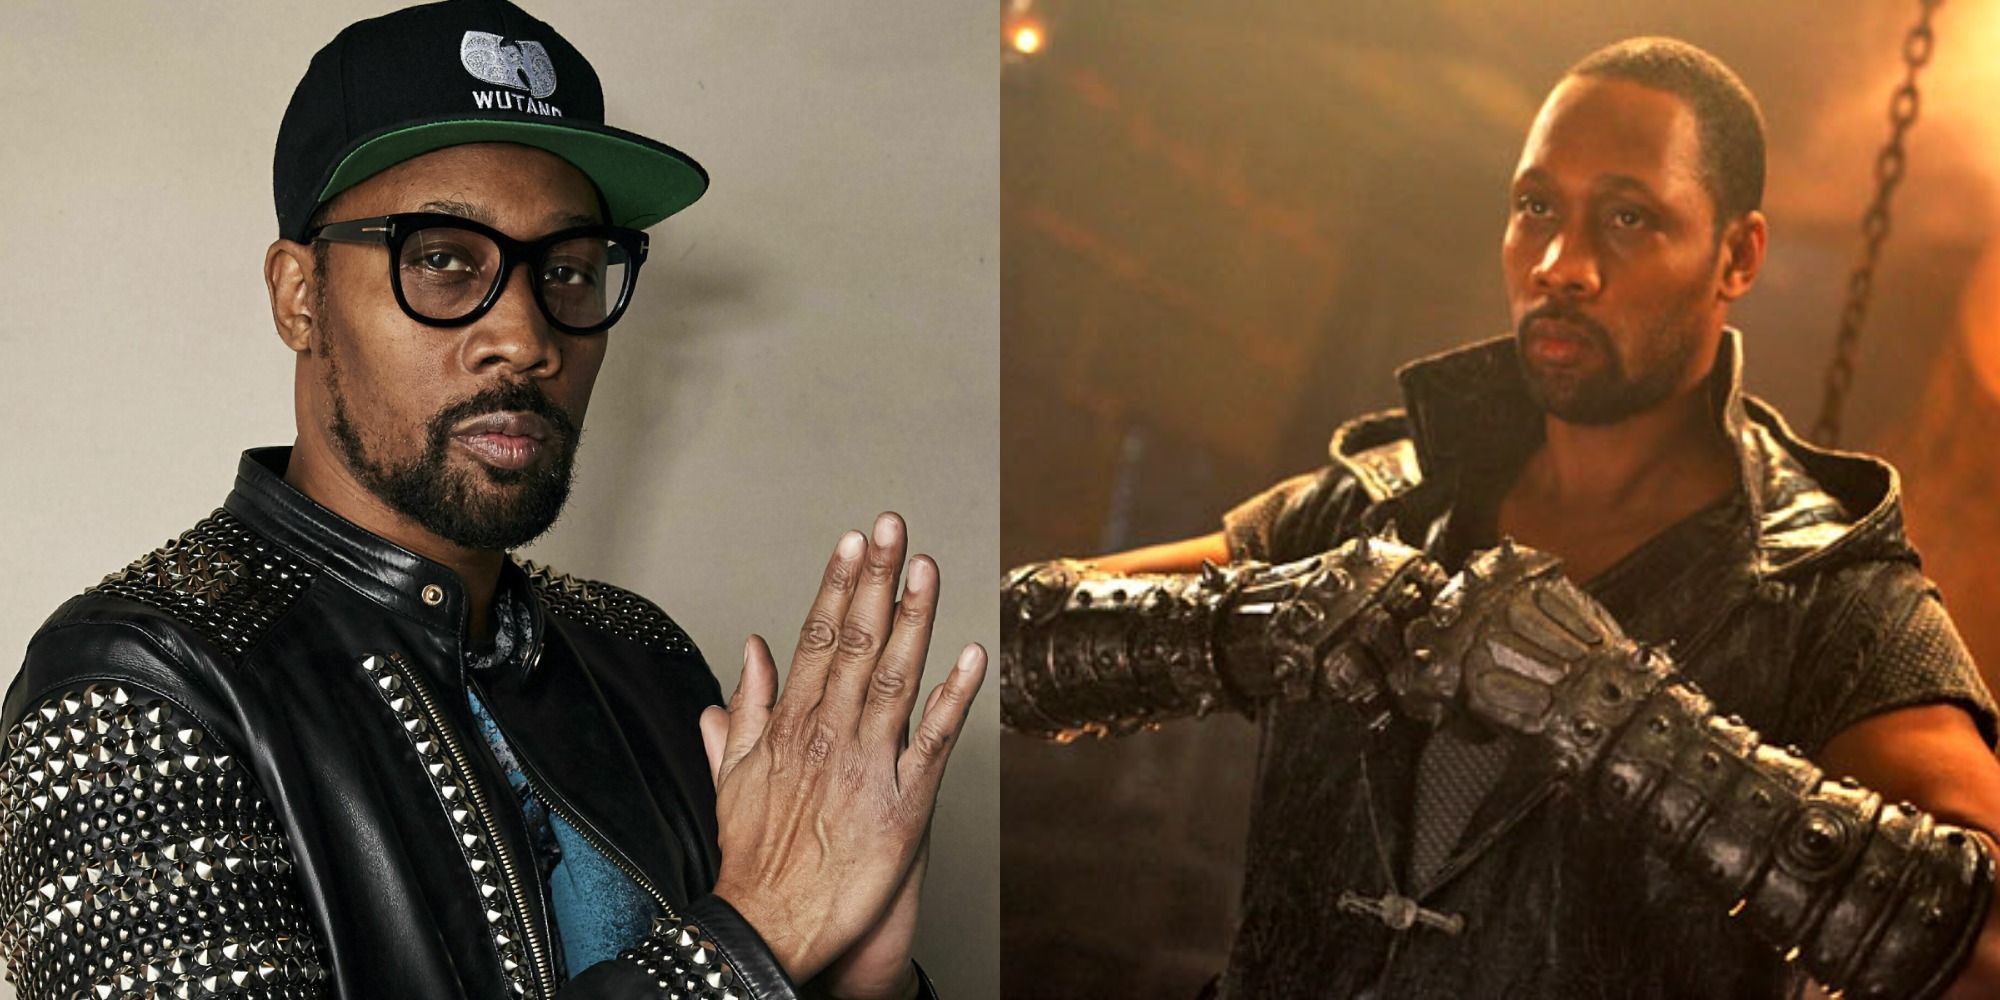 RZA and The Man WIth The Iron FIsts